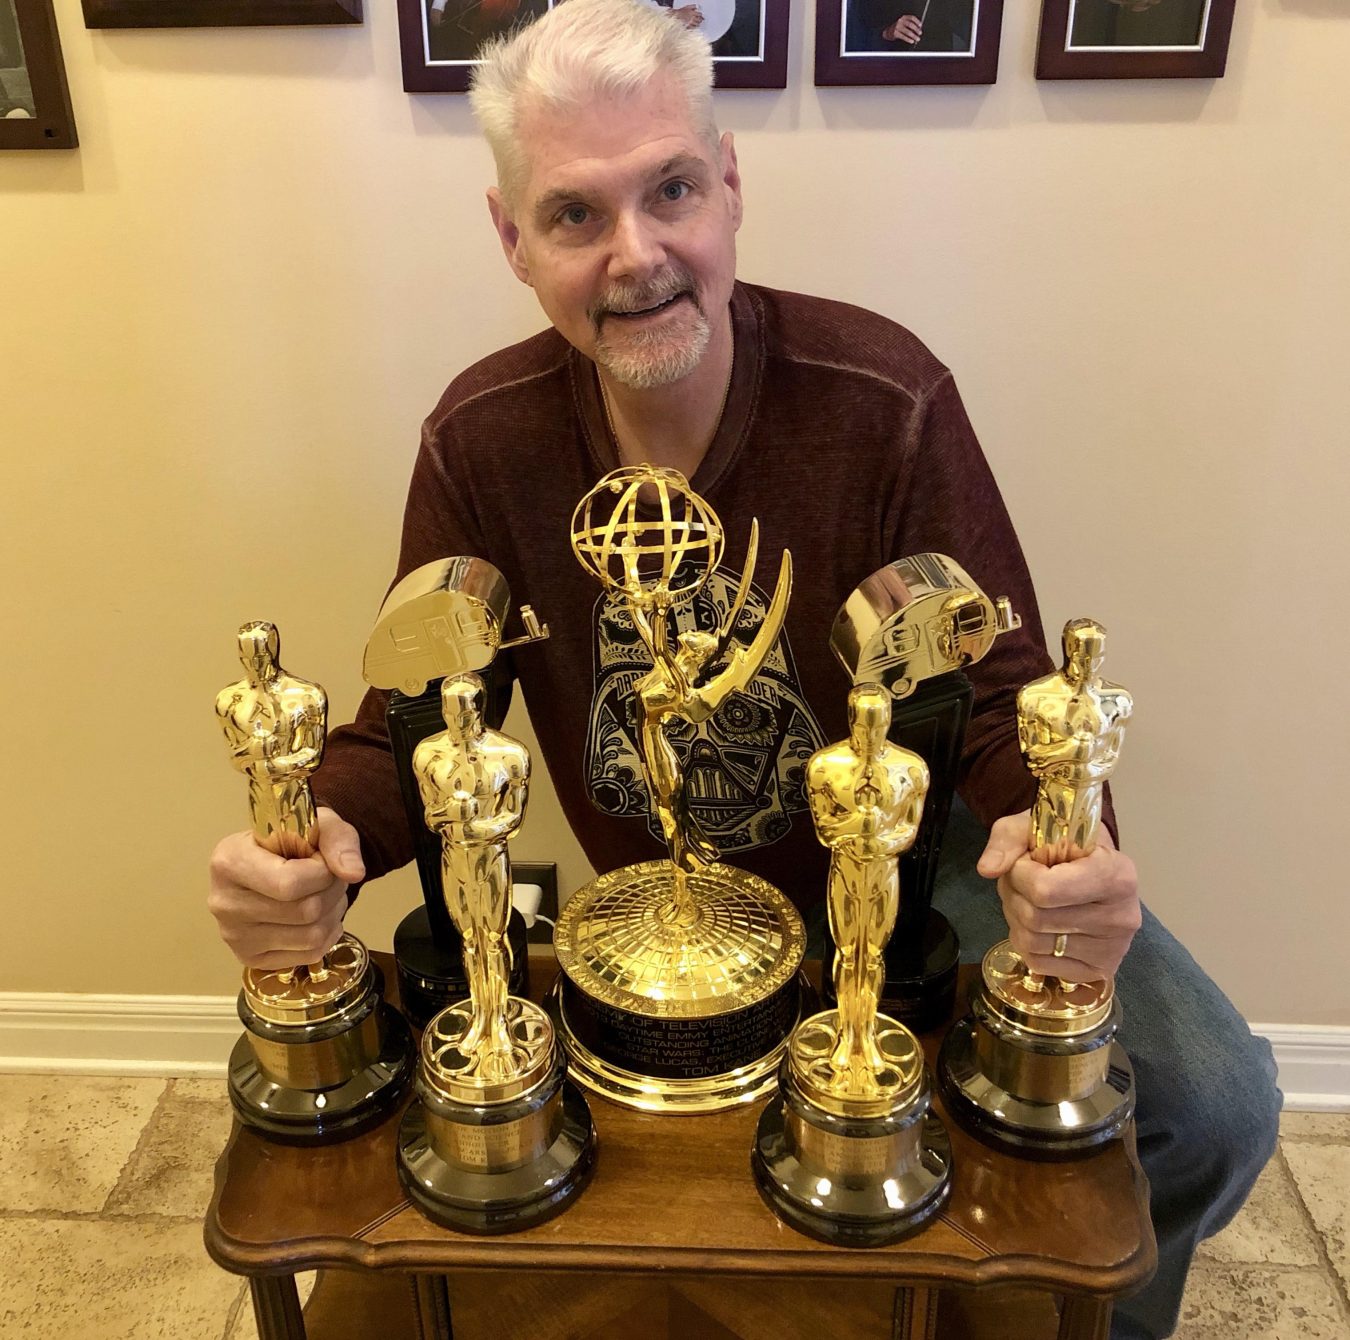 By The Numbers Nationally Known Voiceover Artist Tom Kane IN Kansas